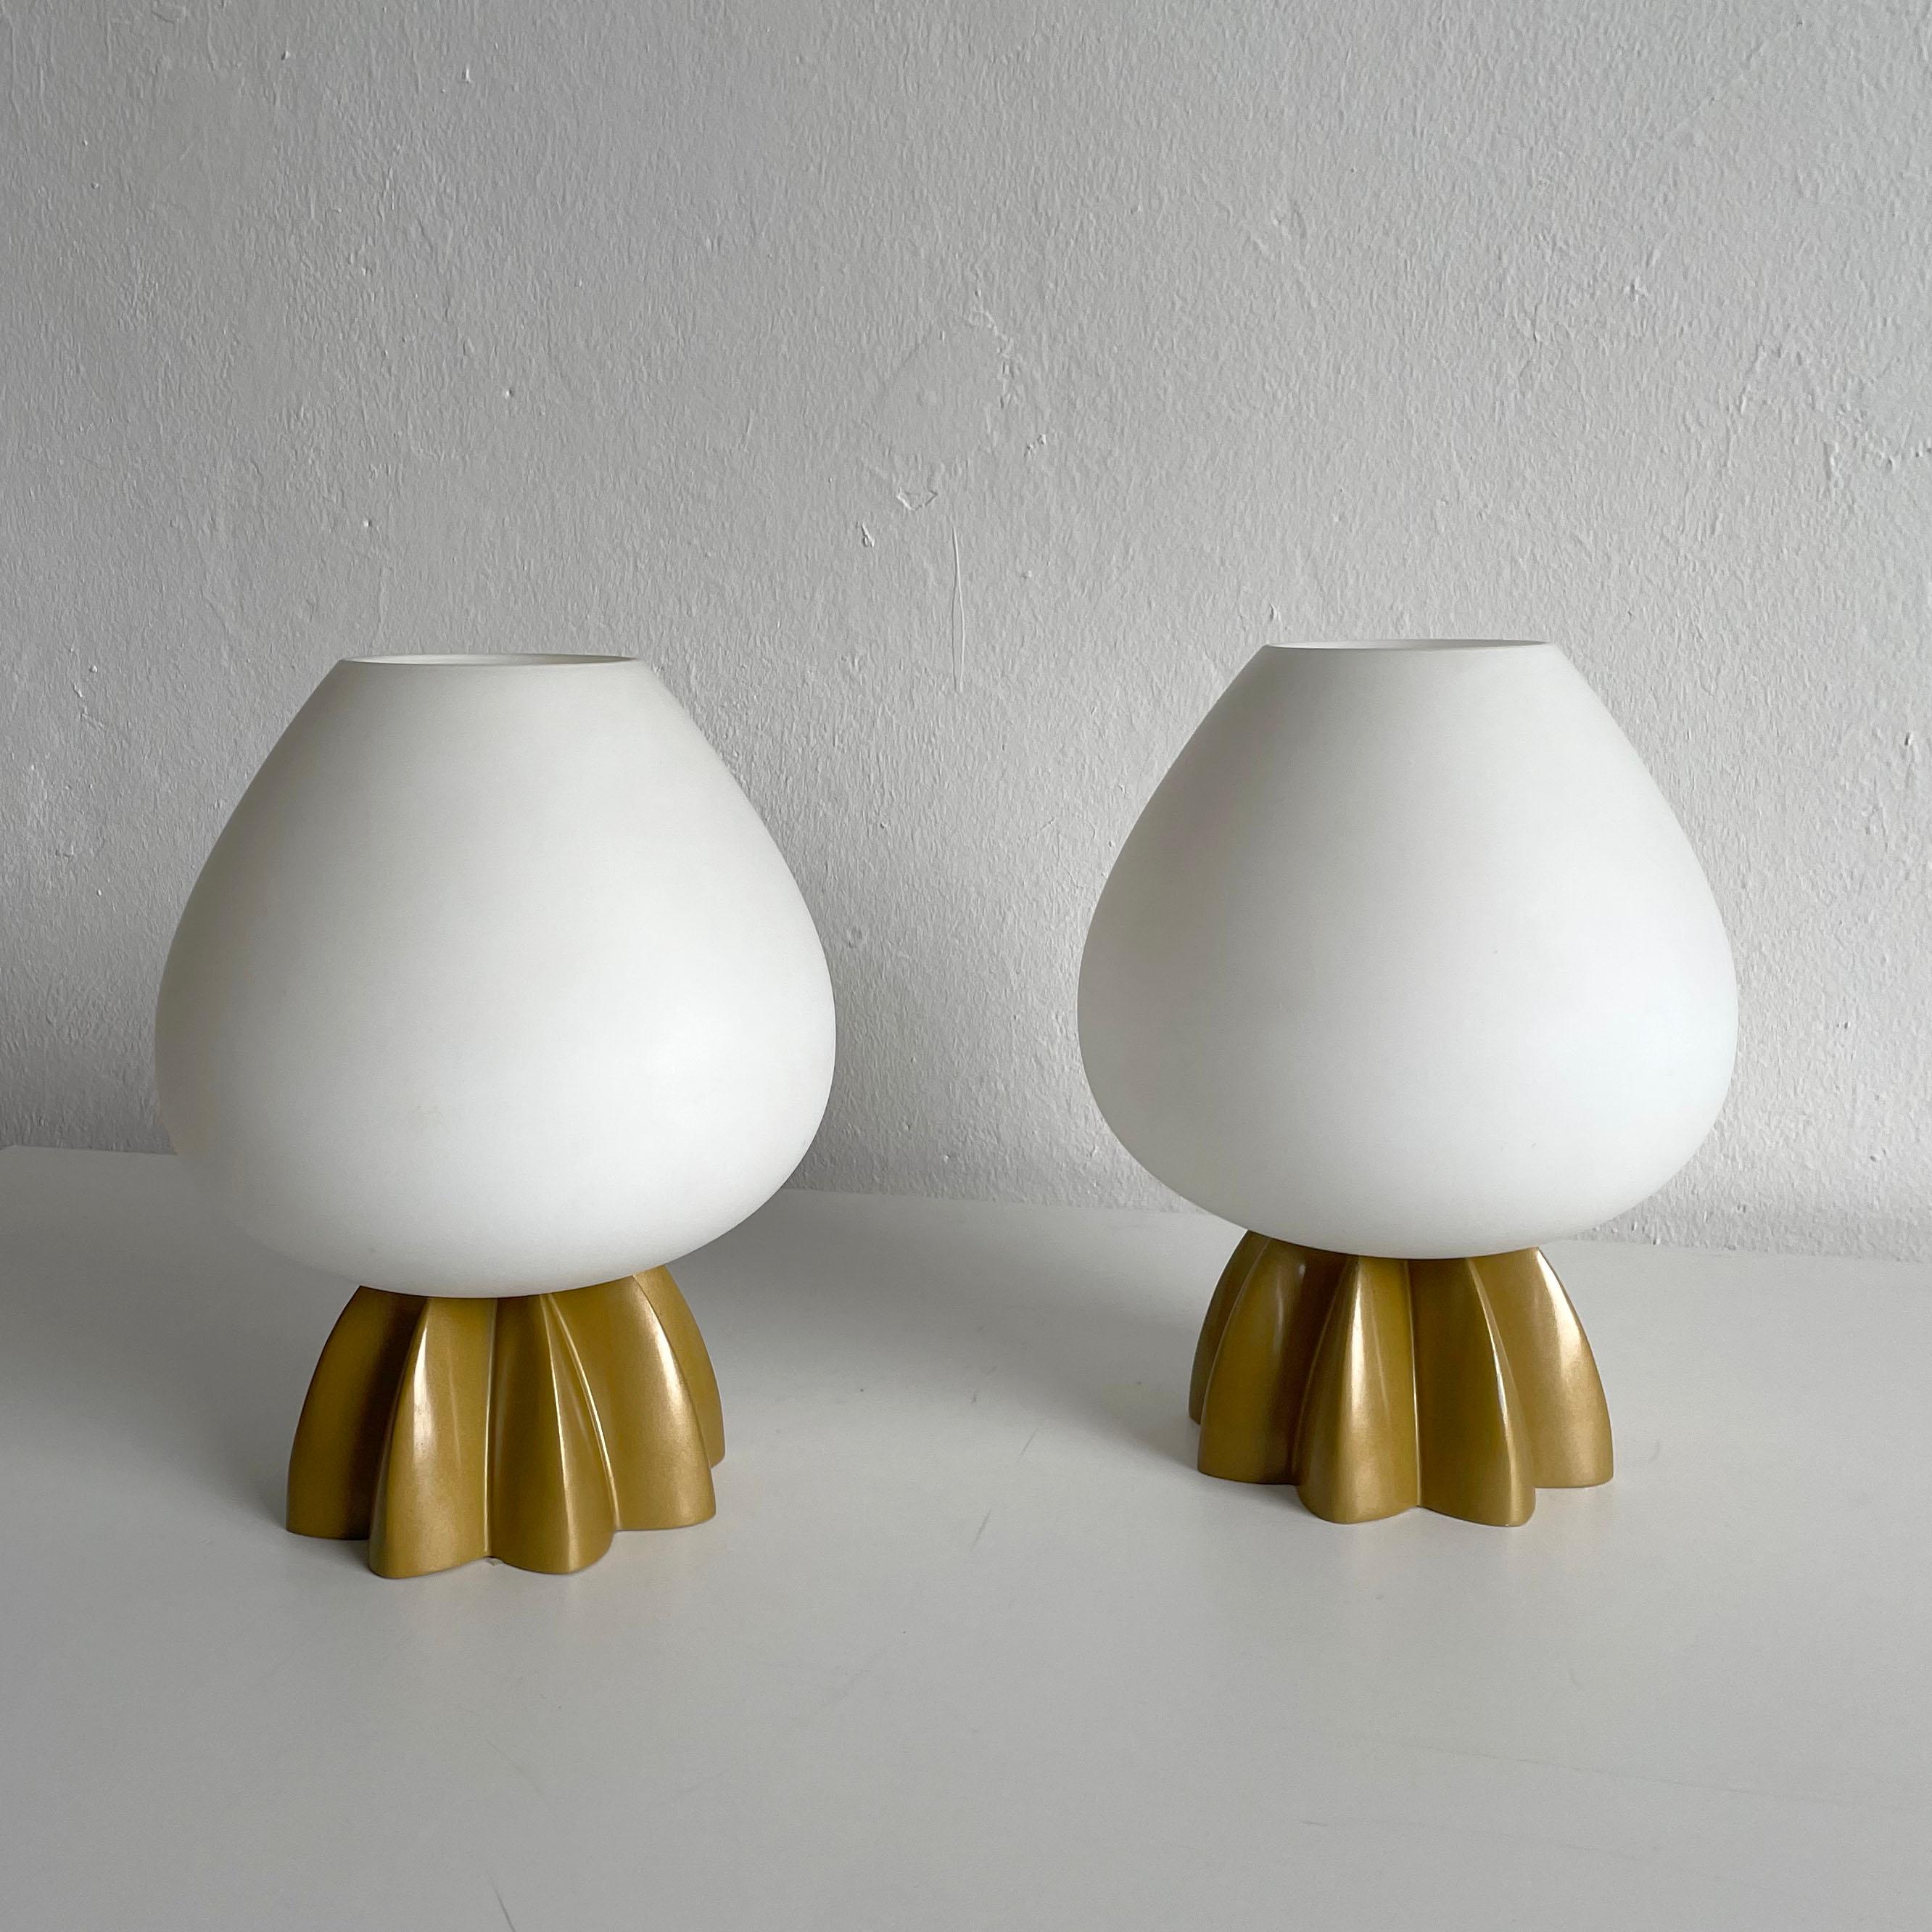 Set of 2 Foscarini Table Lamps, Model Fruits by Rodolfo Dordoni, Italy, 1980s In Good Condition For Sale In Zagreb, HR